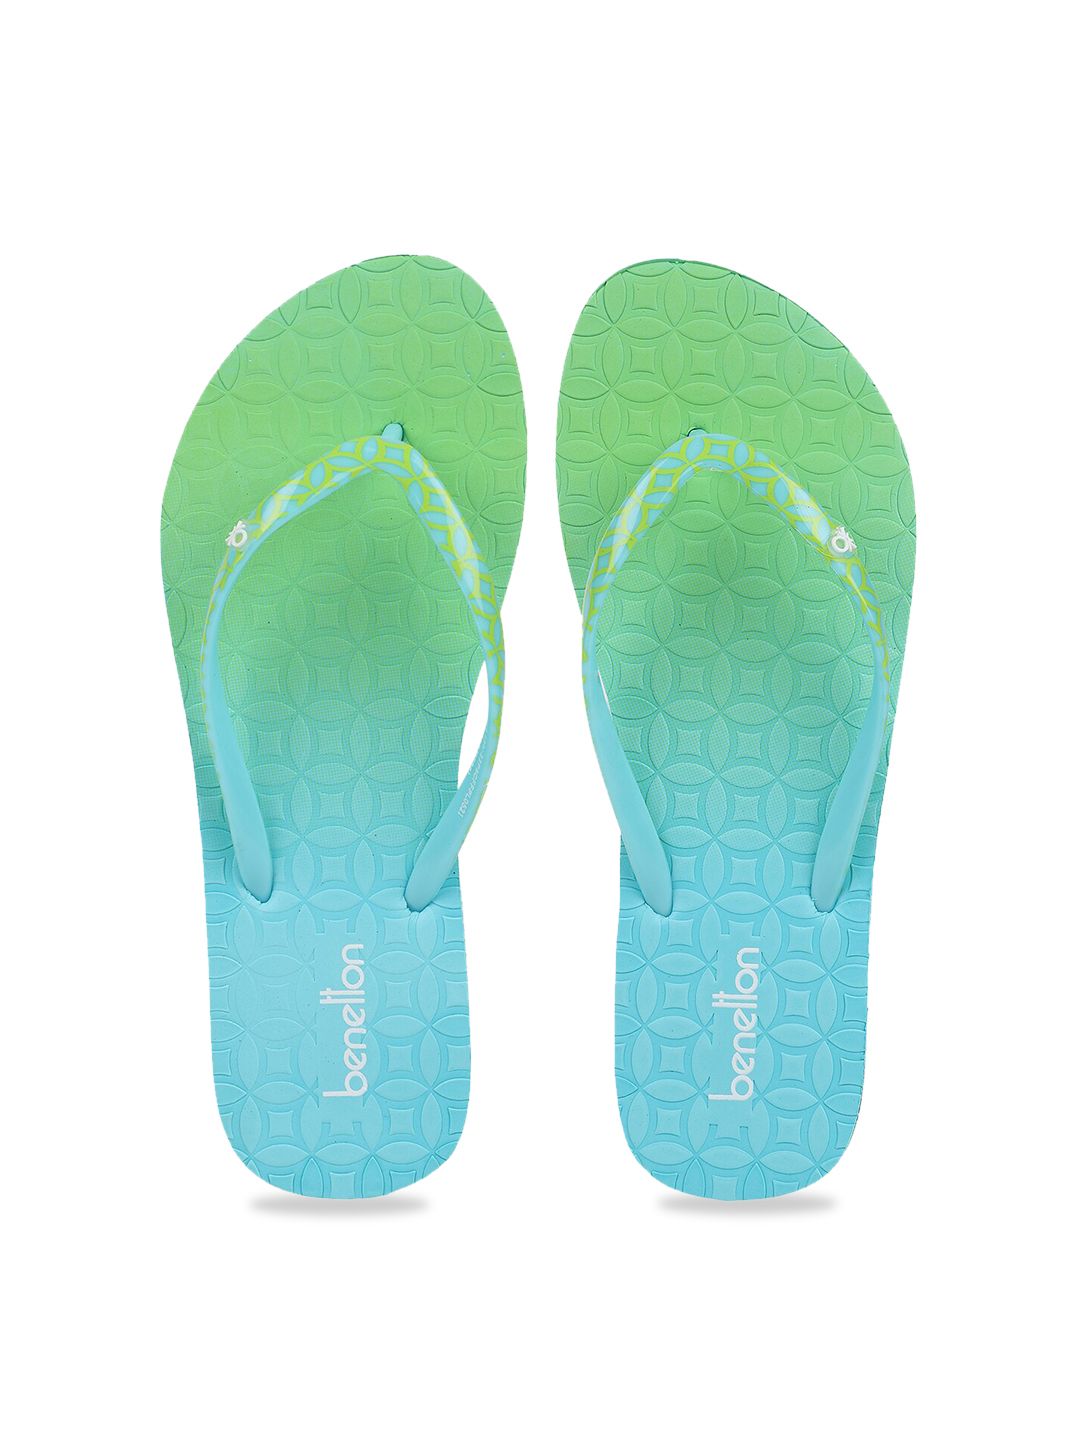 United Colors of Benetton Women Green & Blue Printed Rubber Thong Flip-Flops Price in India